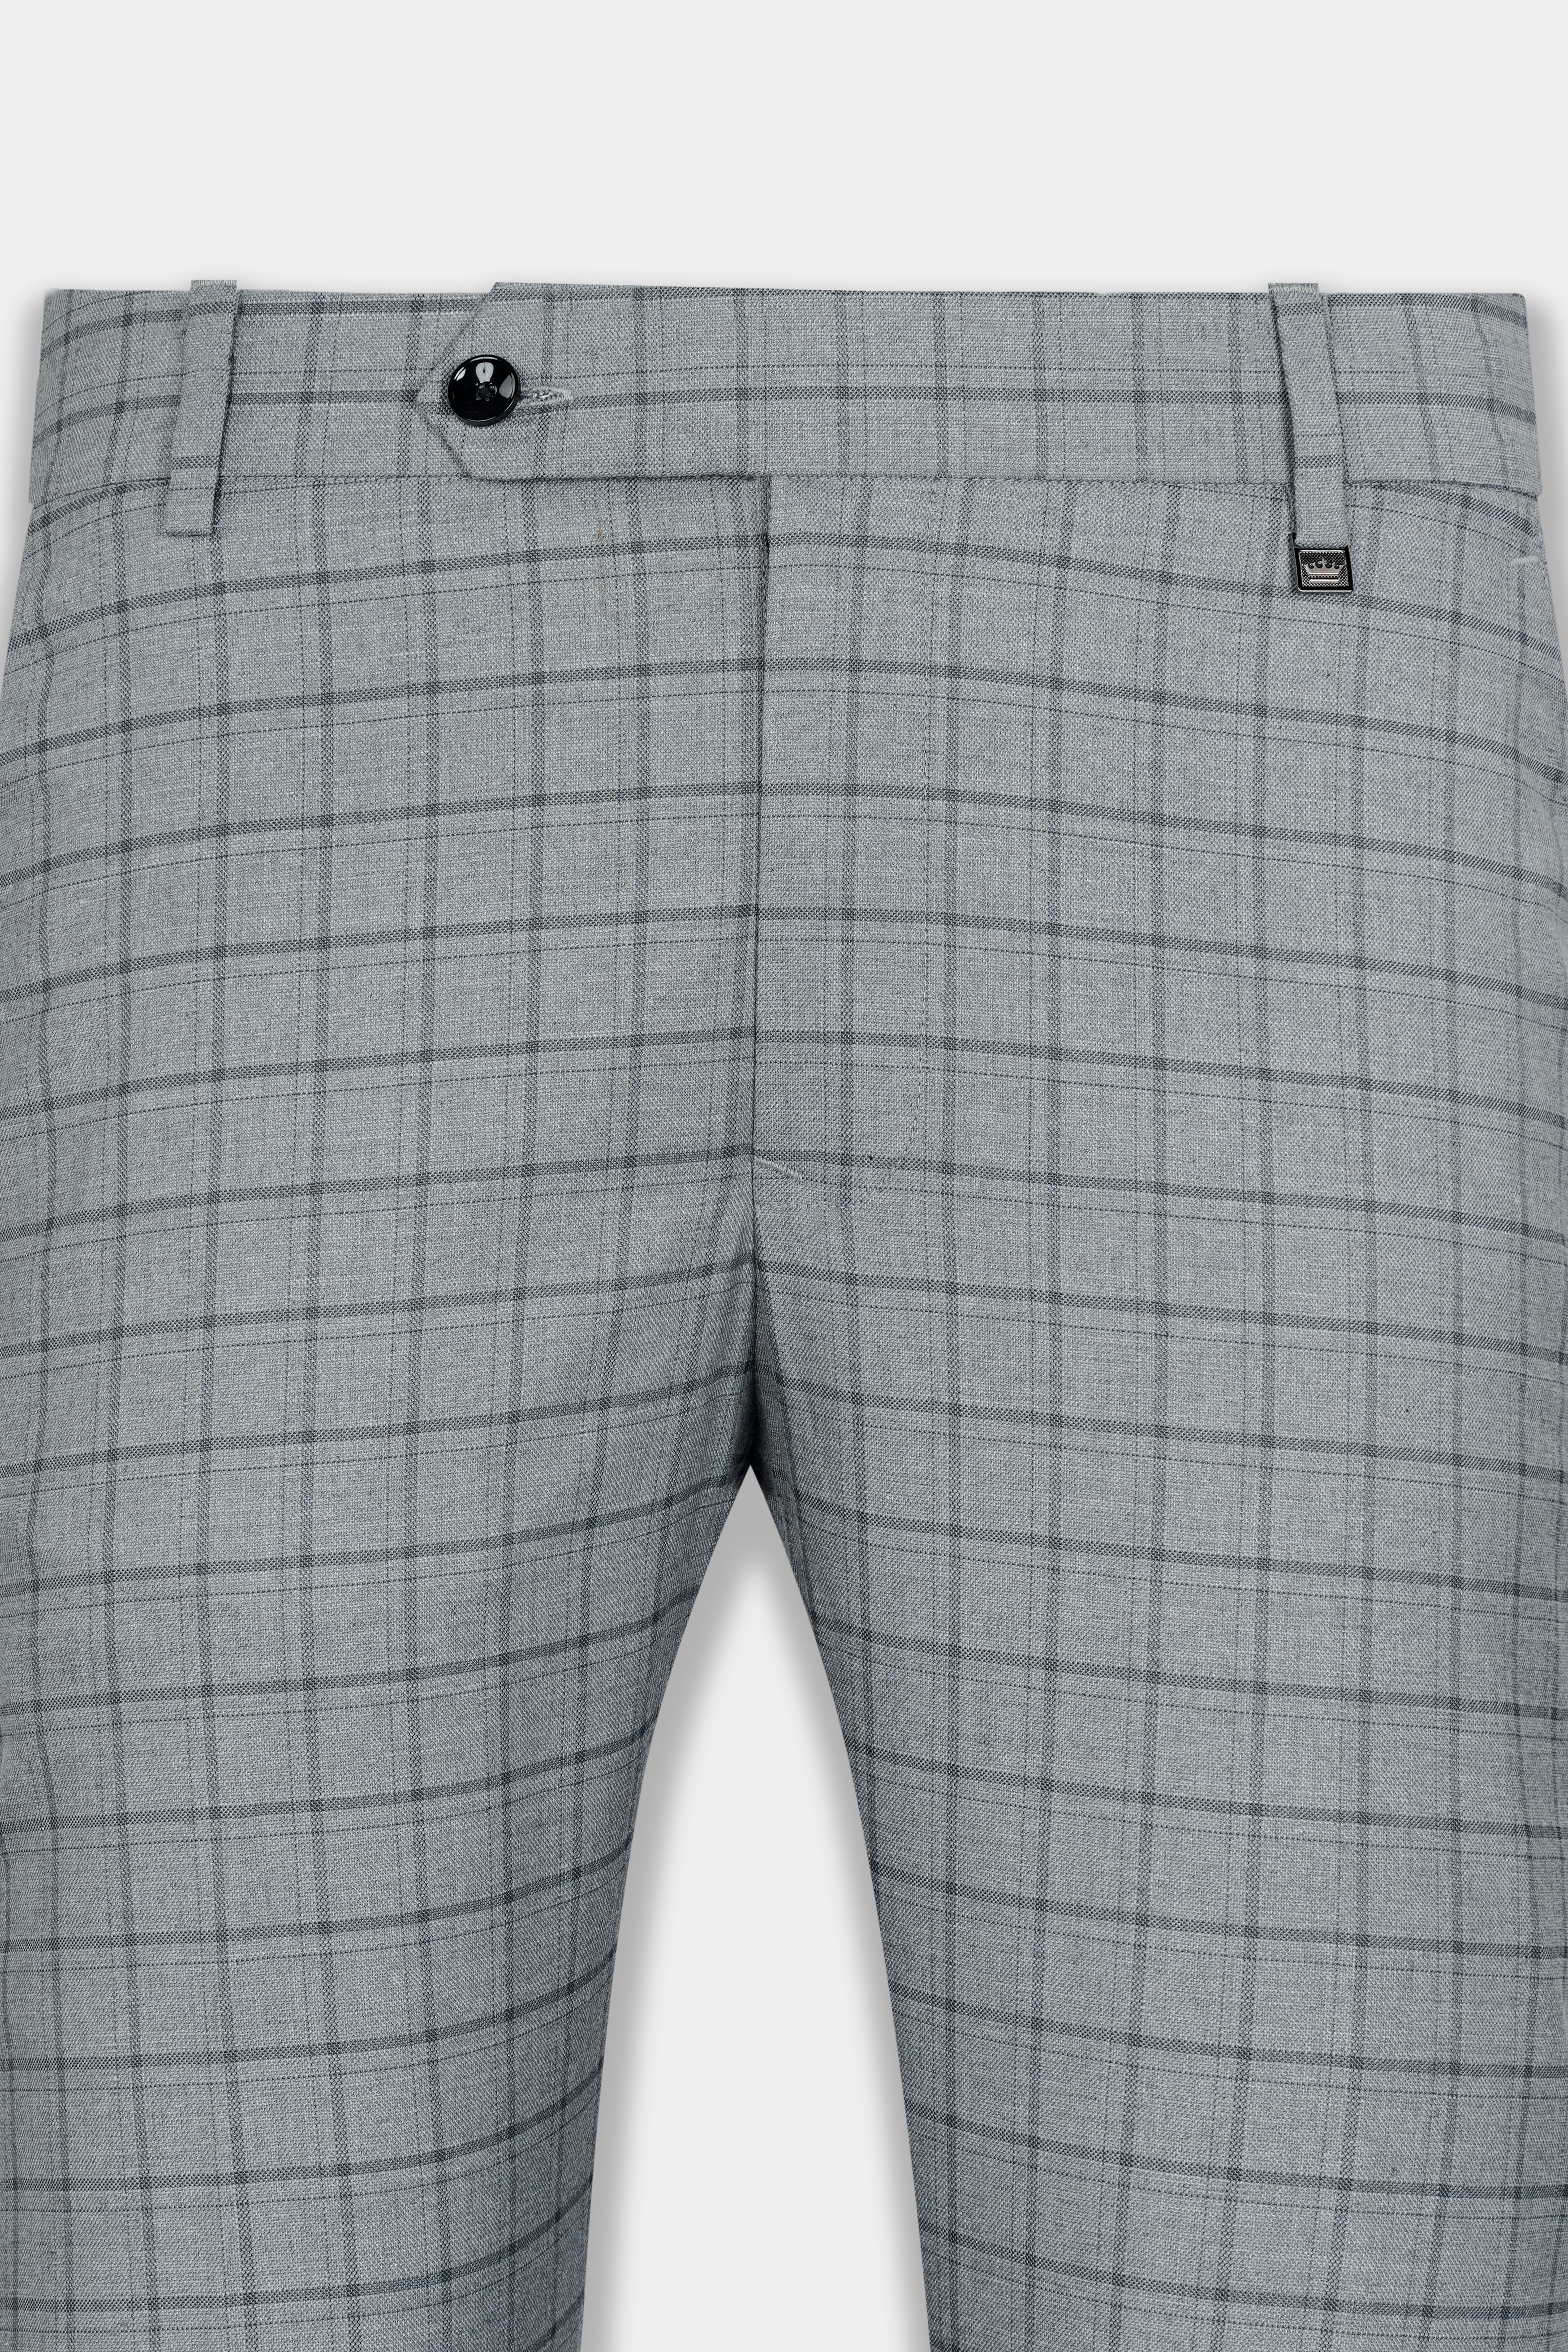 Boulder Gray Checkered Wool Rich Pant T2930-SW-28, T2930-SW-30, T2930-SW-32, T2930-SW-34, T2930-SW-36, T2930-SW-38, T2930-SW-40, T2930-SW-42, T2930-SW-44